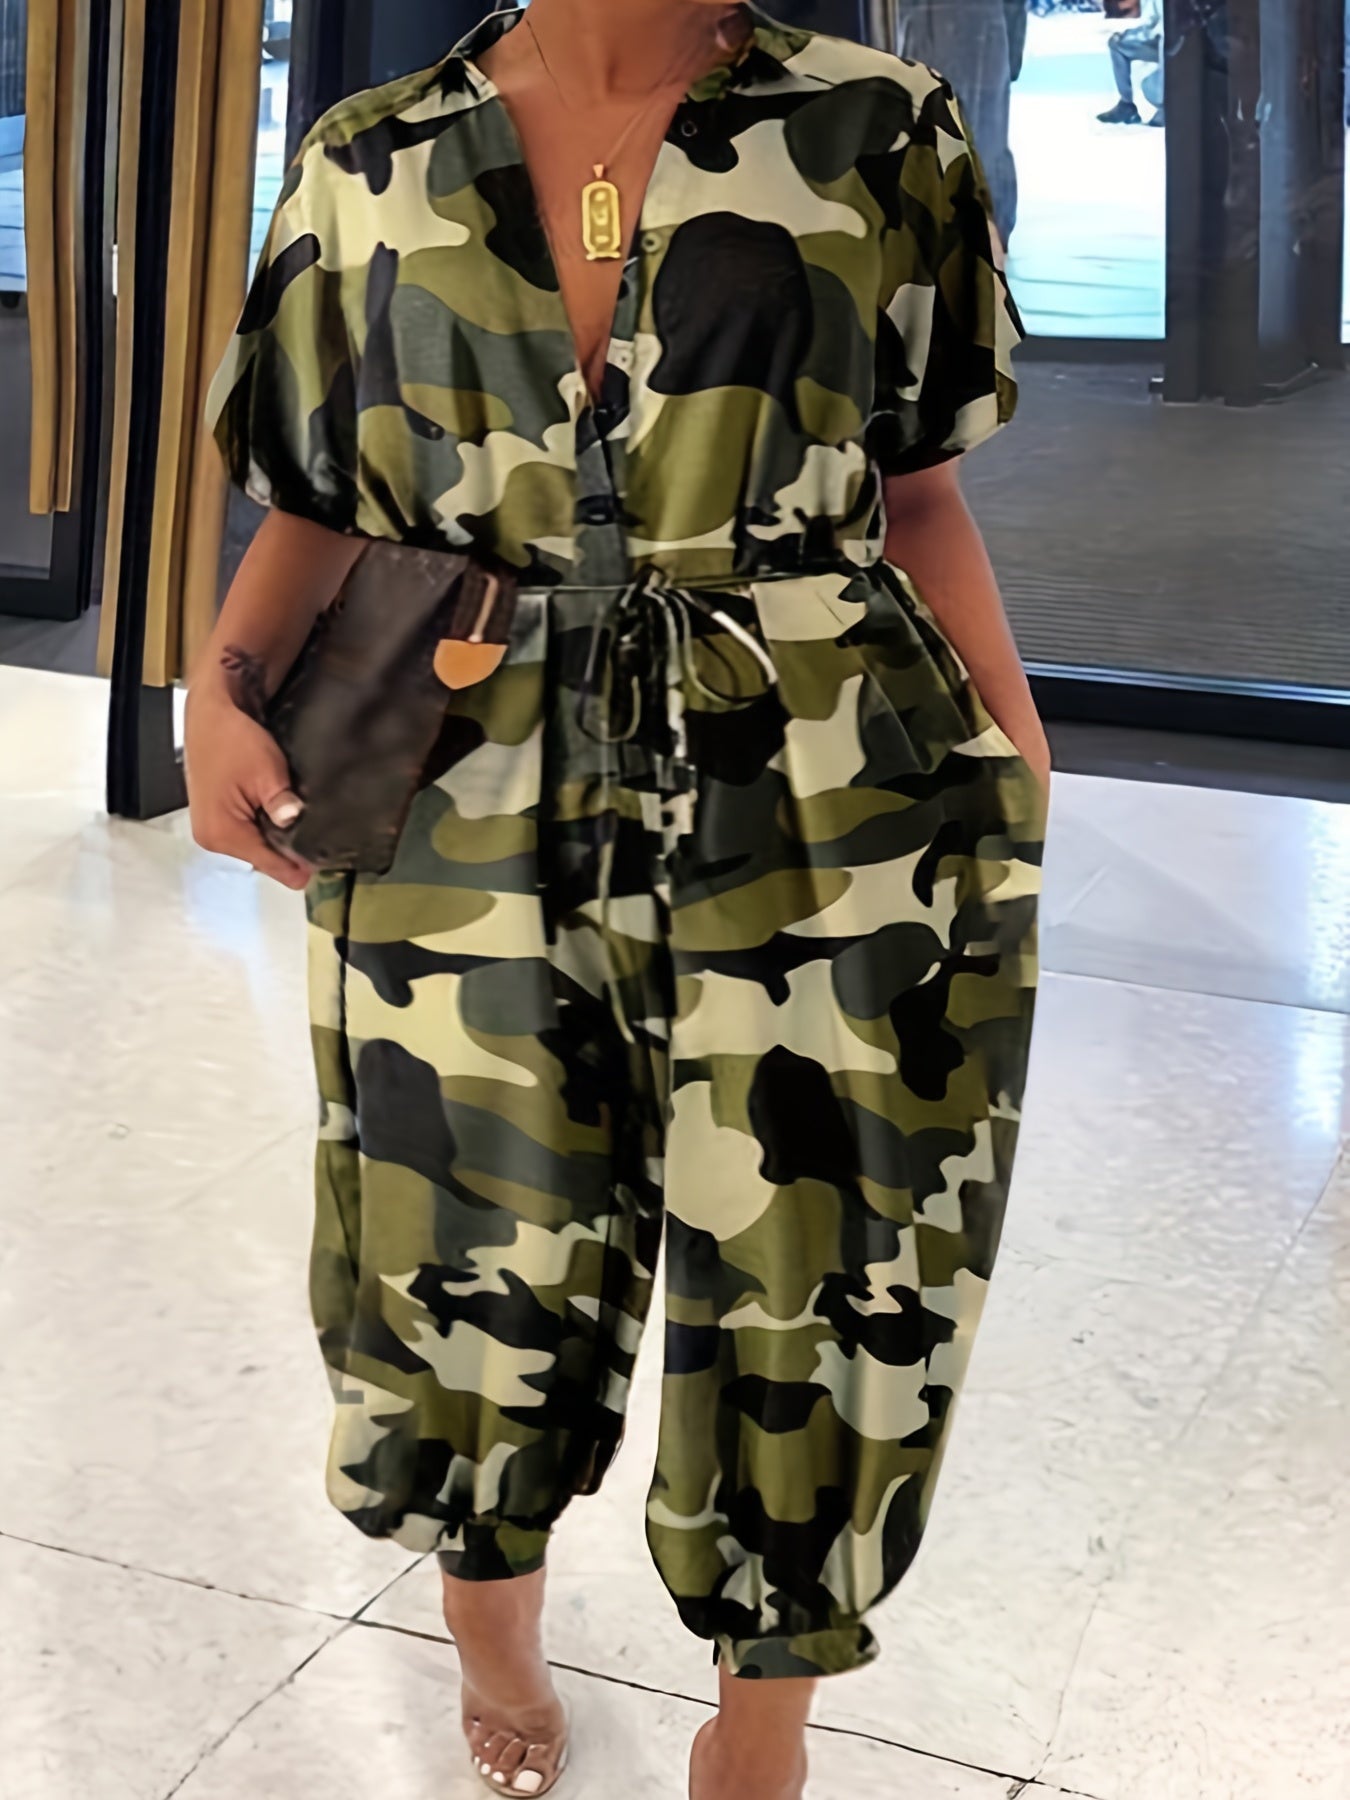 Plus Size Casual Jumpsuit, Women's Plus Camo Print Button Up Turn Down Collar Short Sleeve Tapered Leg Jumpsuit With Belt